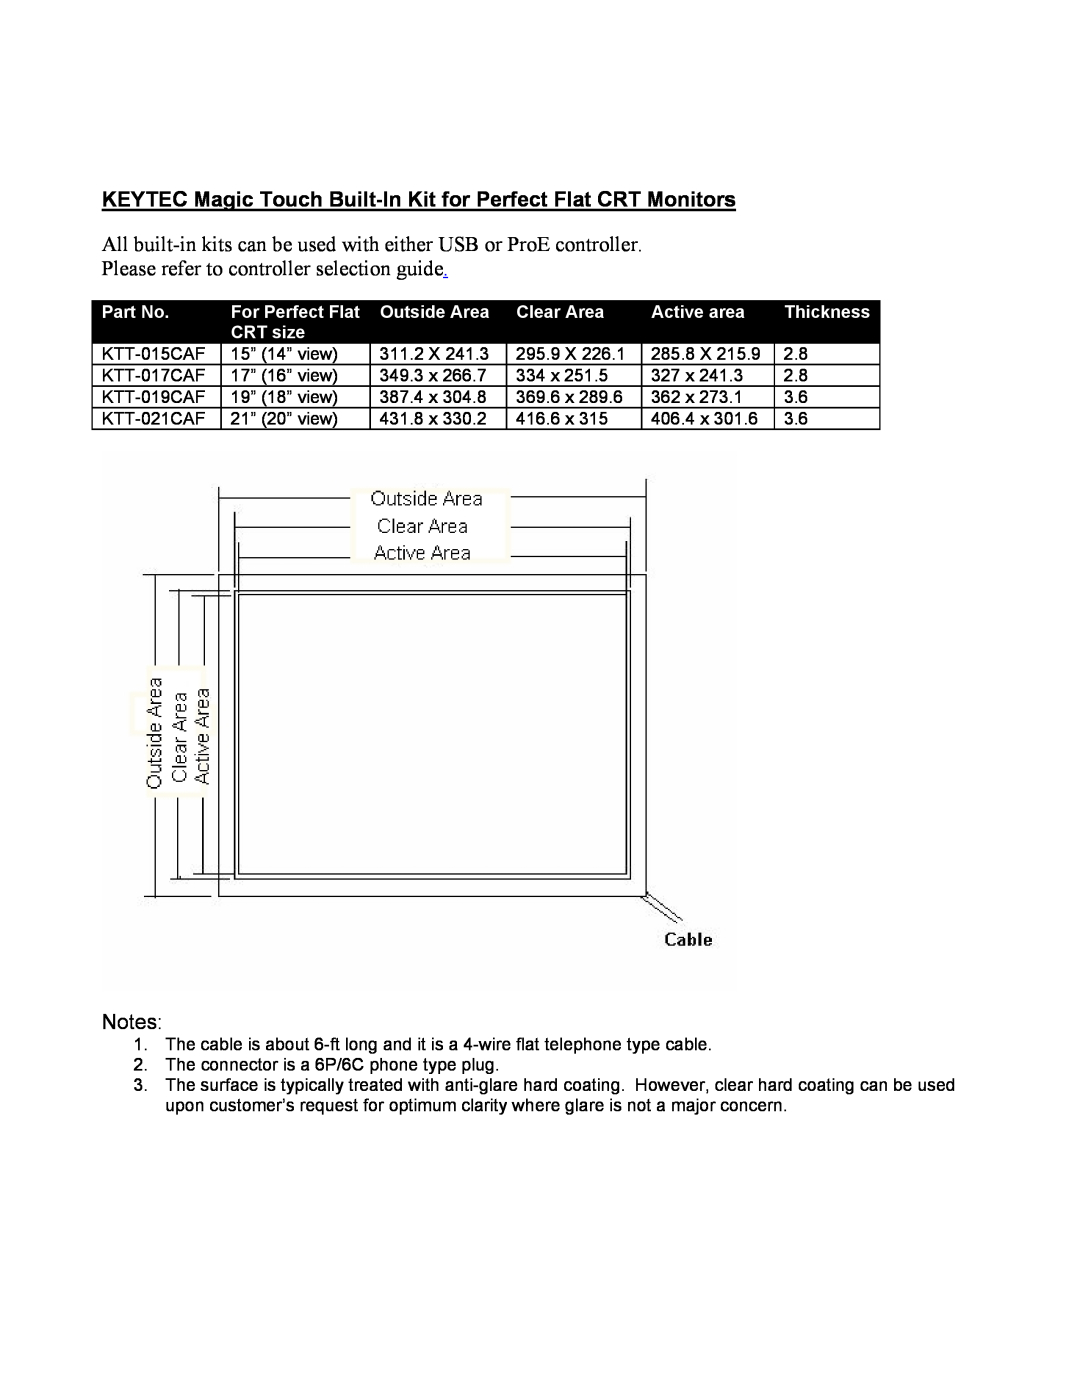 Keytec KTT-015CAF manual KEYTEC Magic Touch Built-In Kit for Perfect Flat CRT Monitors, For Perfect Flat, Outside Area 